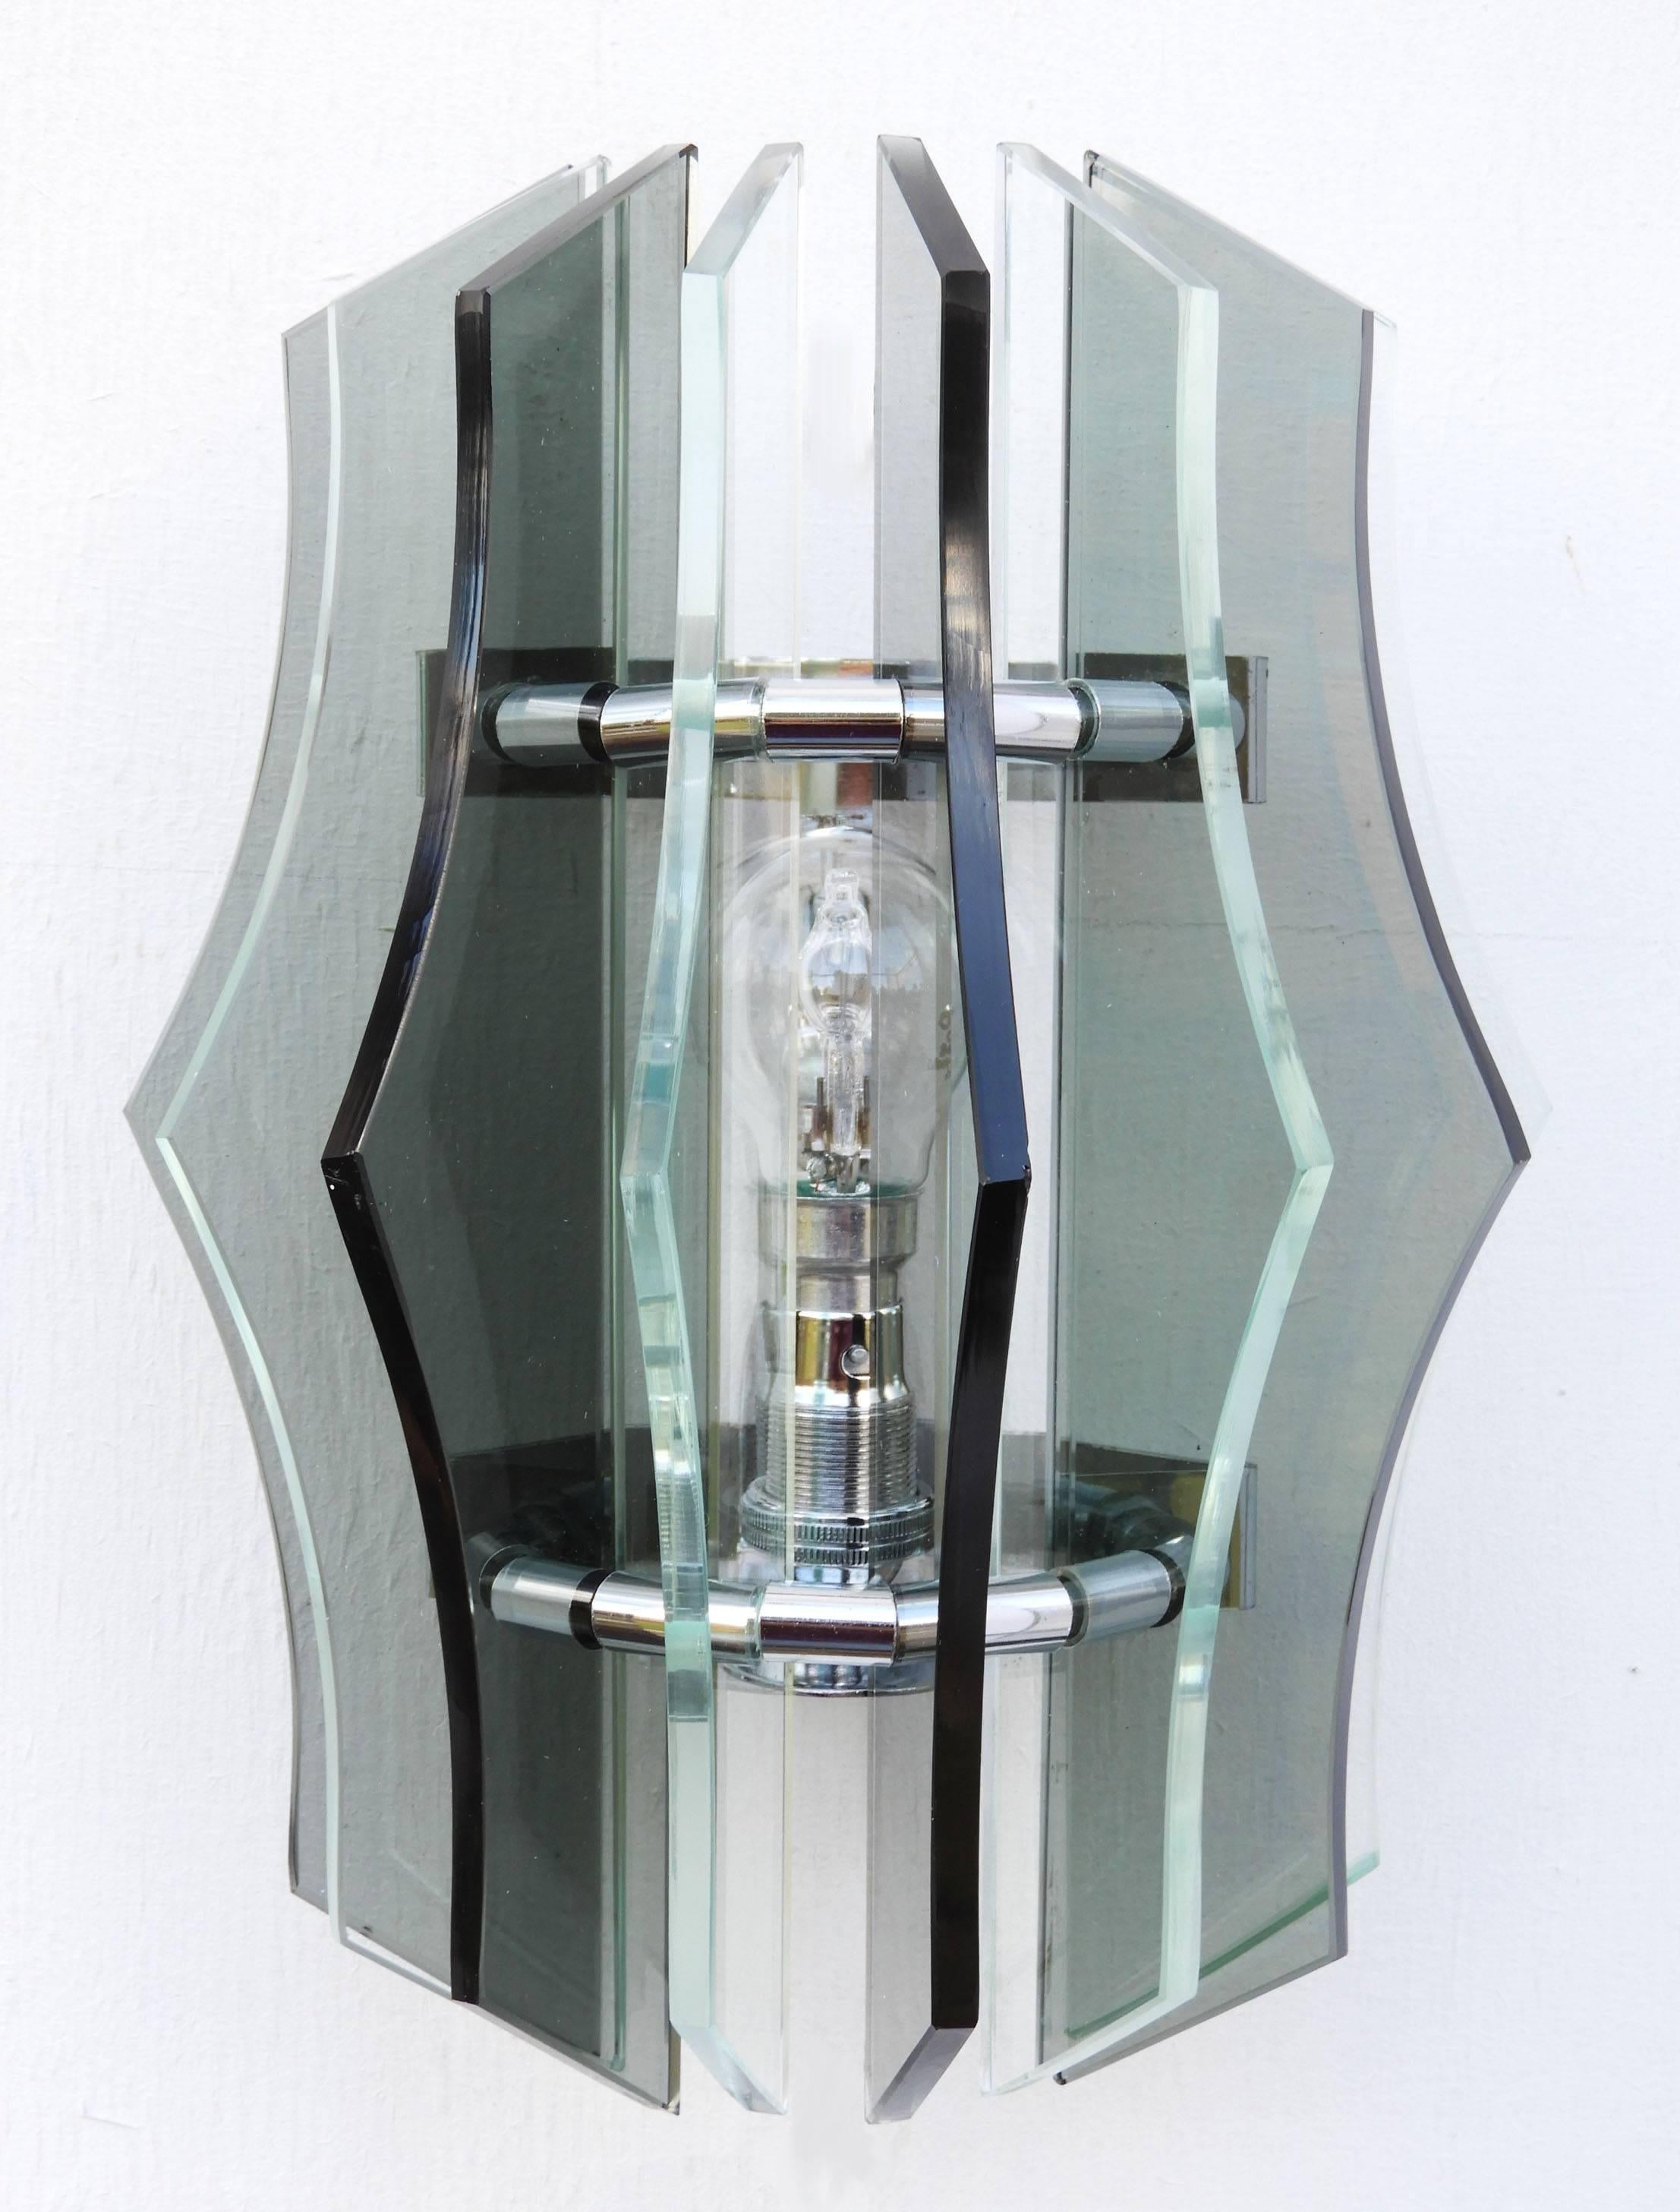 Pair of Italian midcentury smoked glass wall light sconces, circa 1970
Veca without label
Eight alternating geometric shaped clear and black smoked glass in semi circular form on a chromed frame structure.
In very good condition with only minor